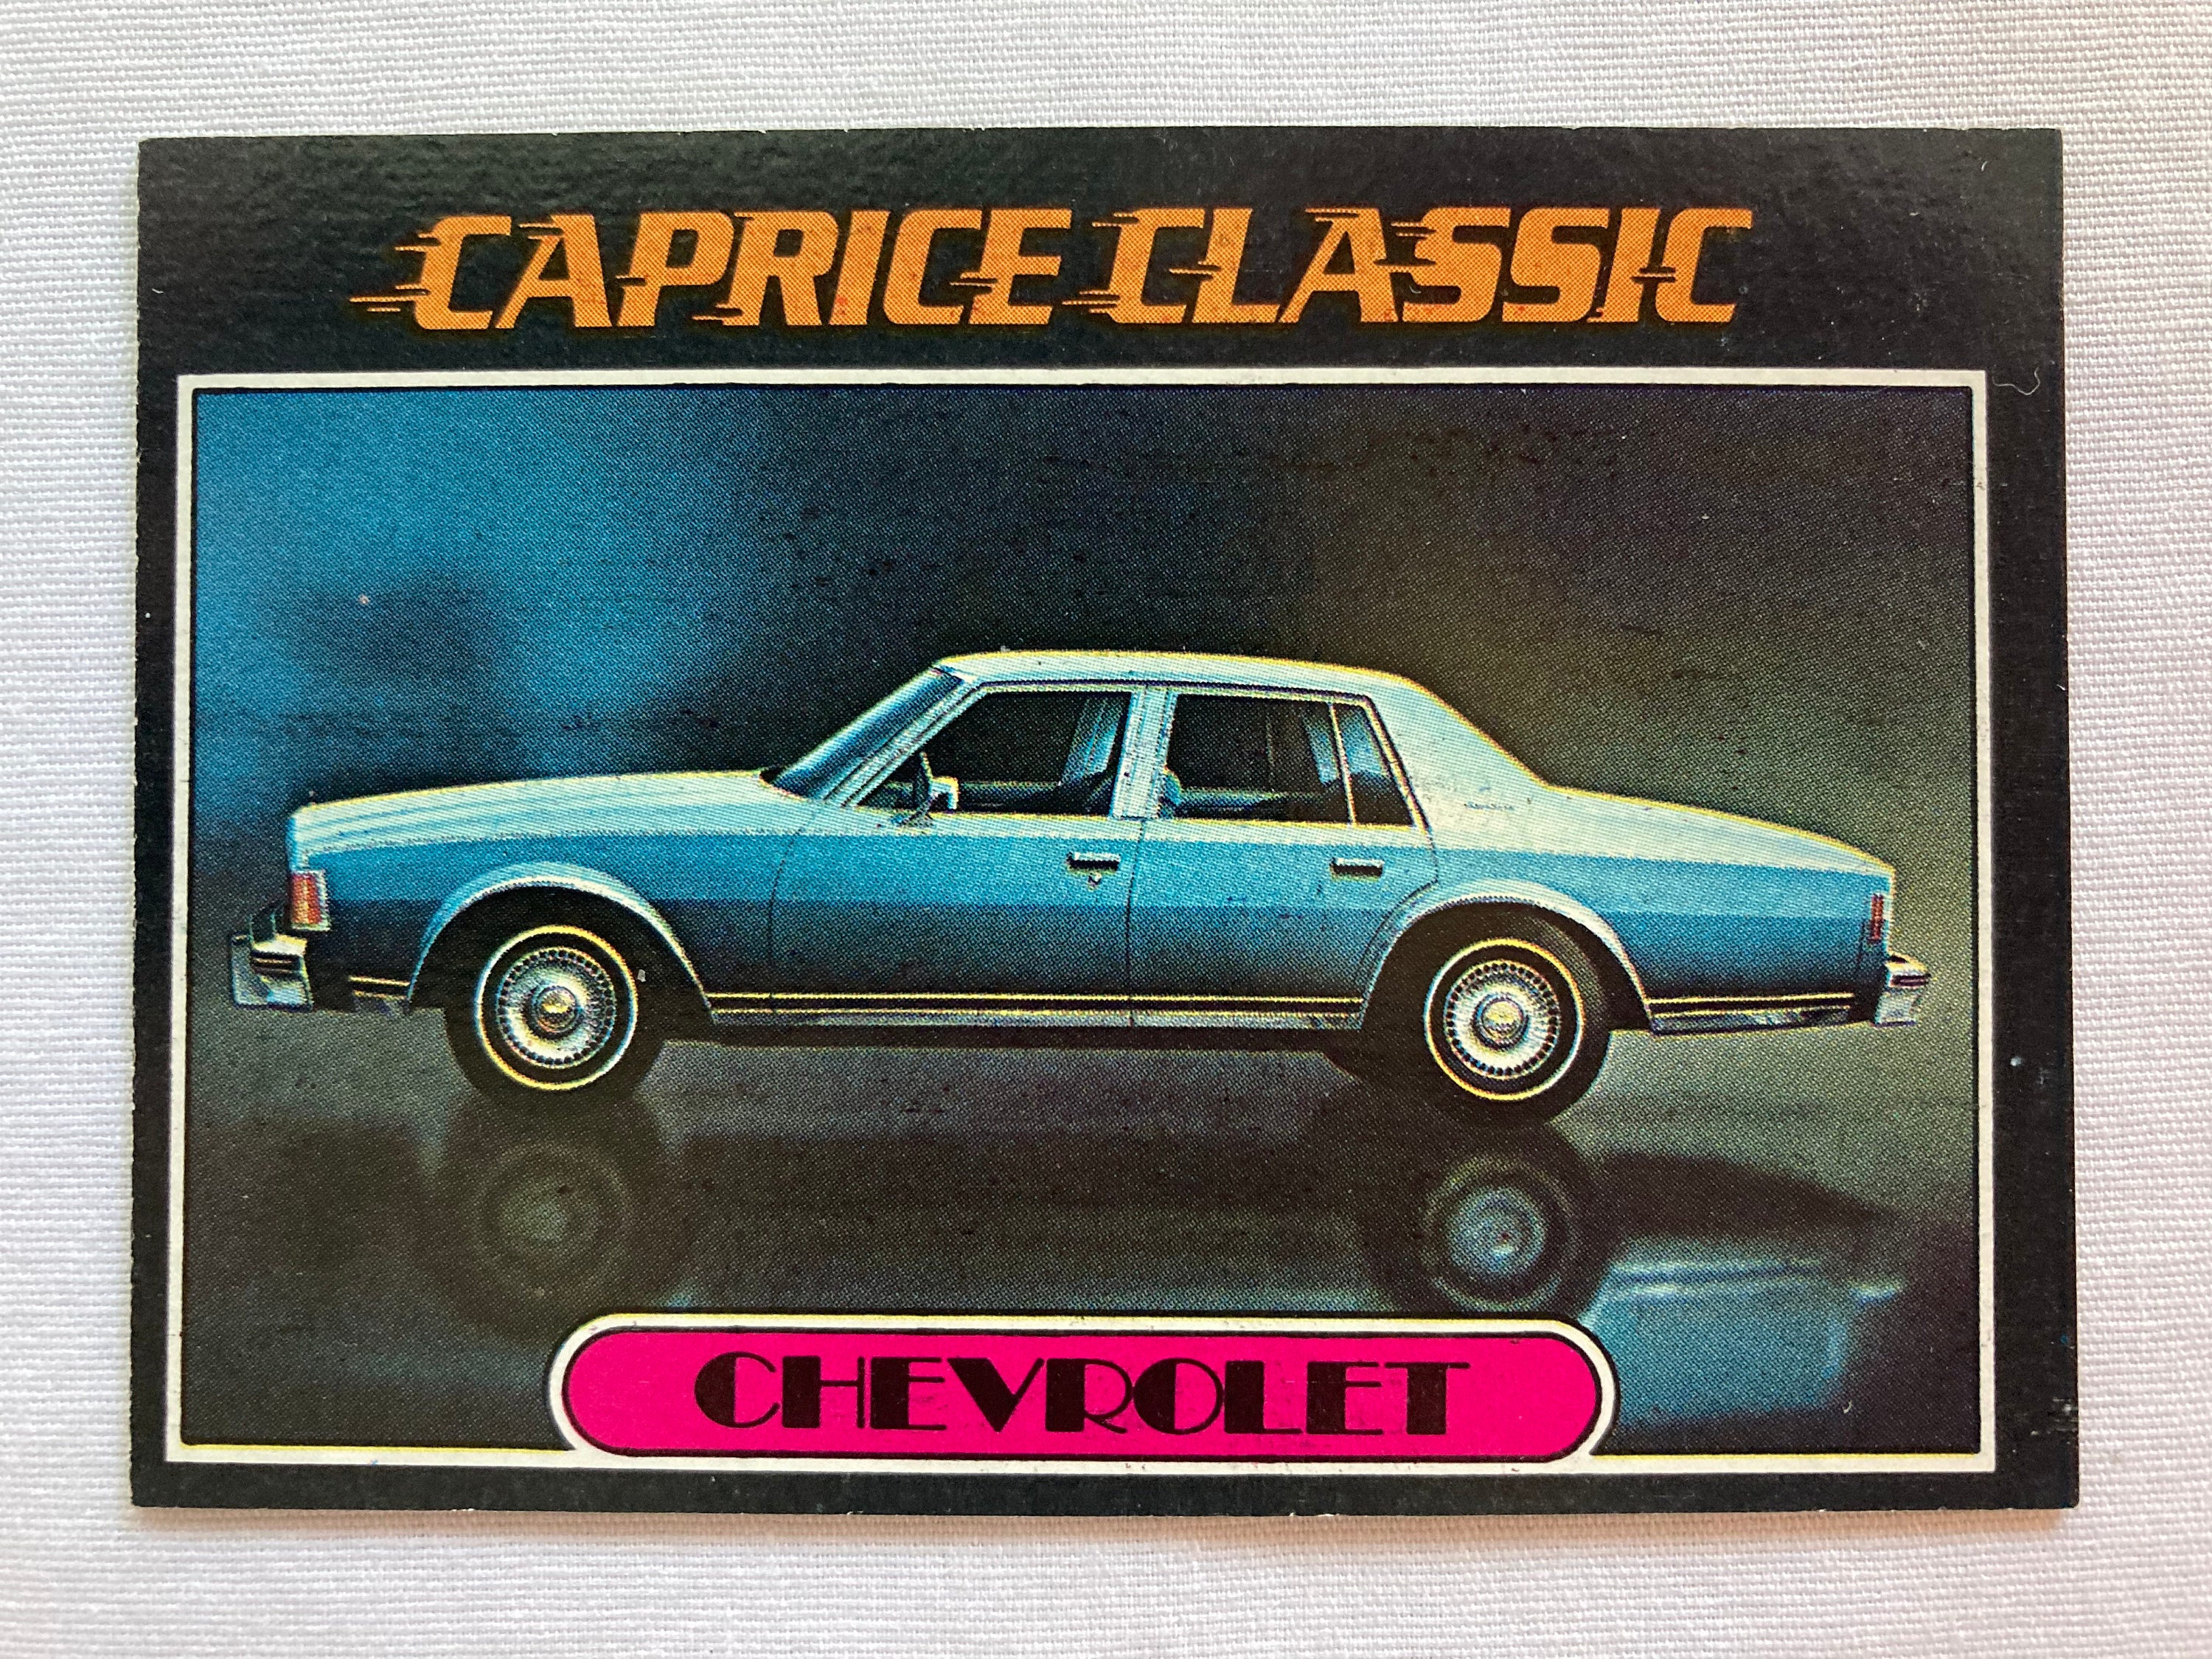 Vintage Chevrolet Caprice Classic Trading Card Topps Autos - Etsy